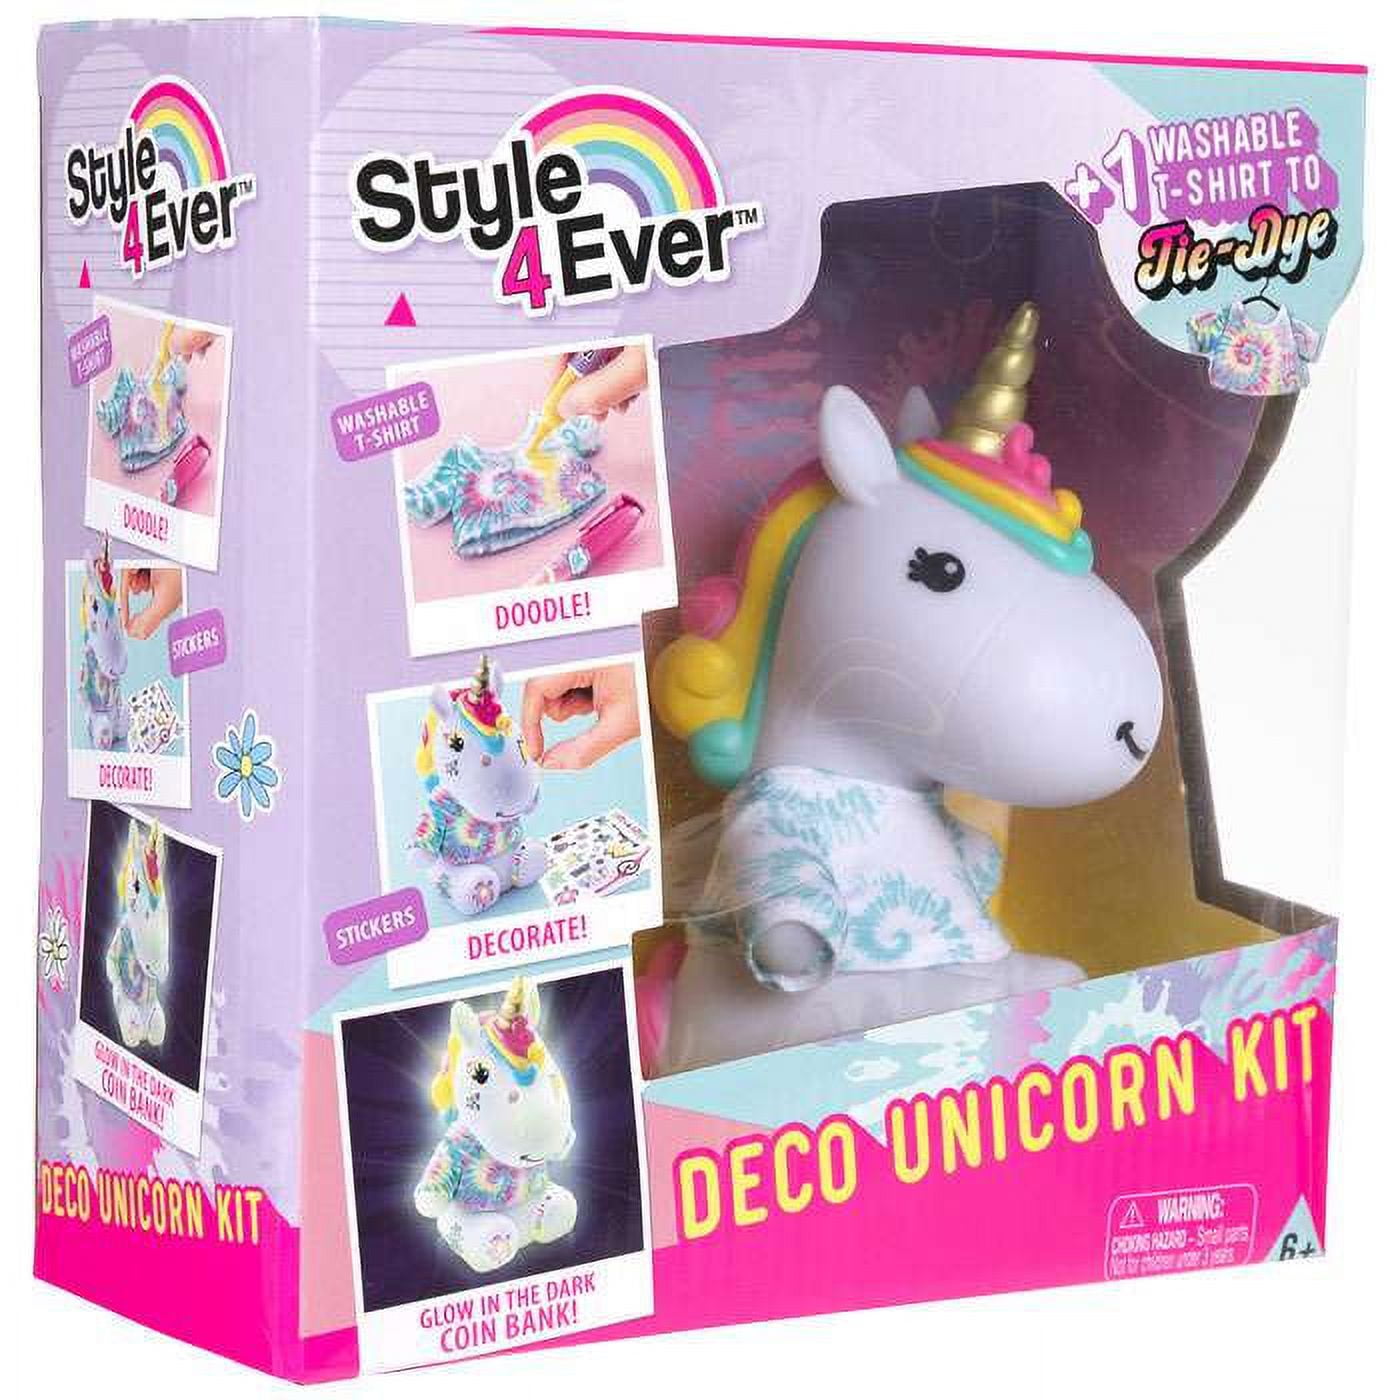 Dikence Gifts for Girl Age 6 7 8 9, Unicorns Toys for 5-8 Year Old Kids  Girls Teens Birthday Gift for Girl Age 7 8 9 10 Kid Arts and Crafts Kits